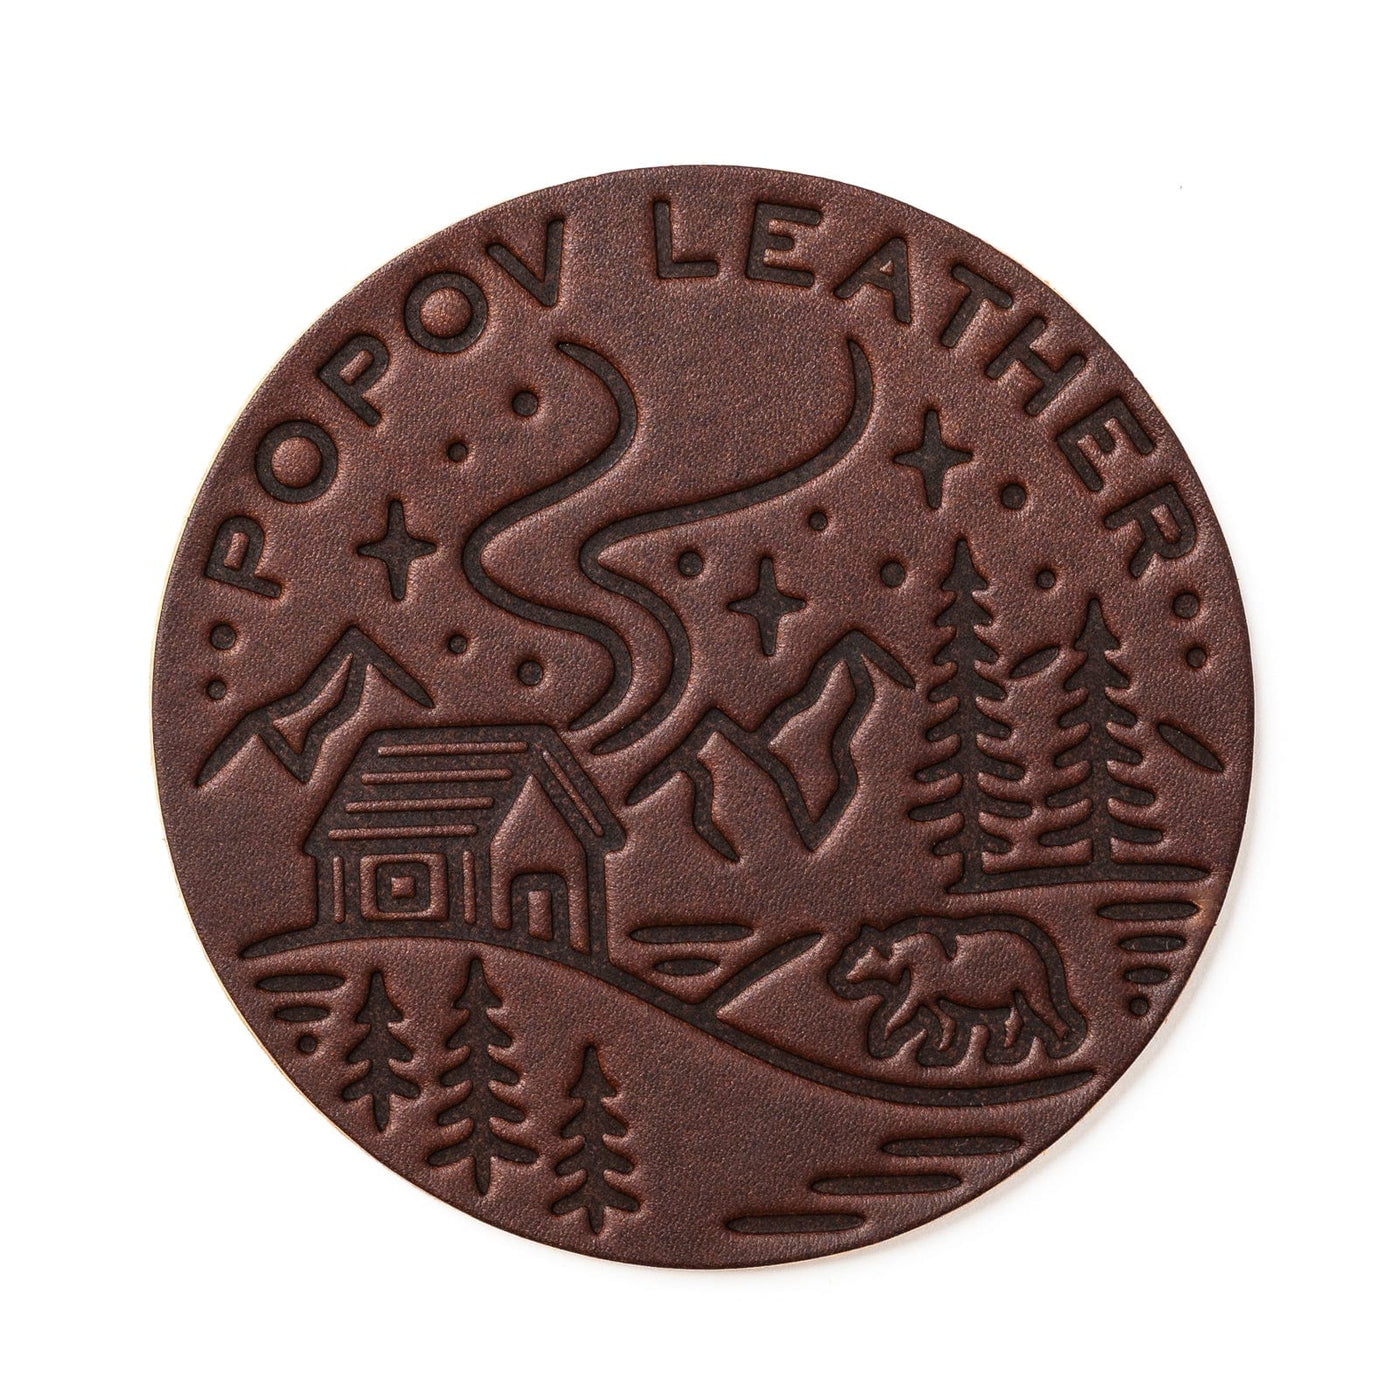 Four Seasons Coasters - Heritage Brown - 4 Pack Popov Leather